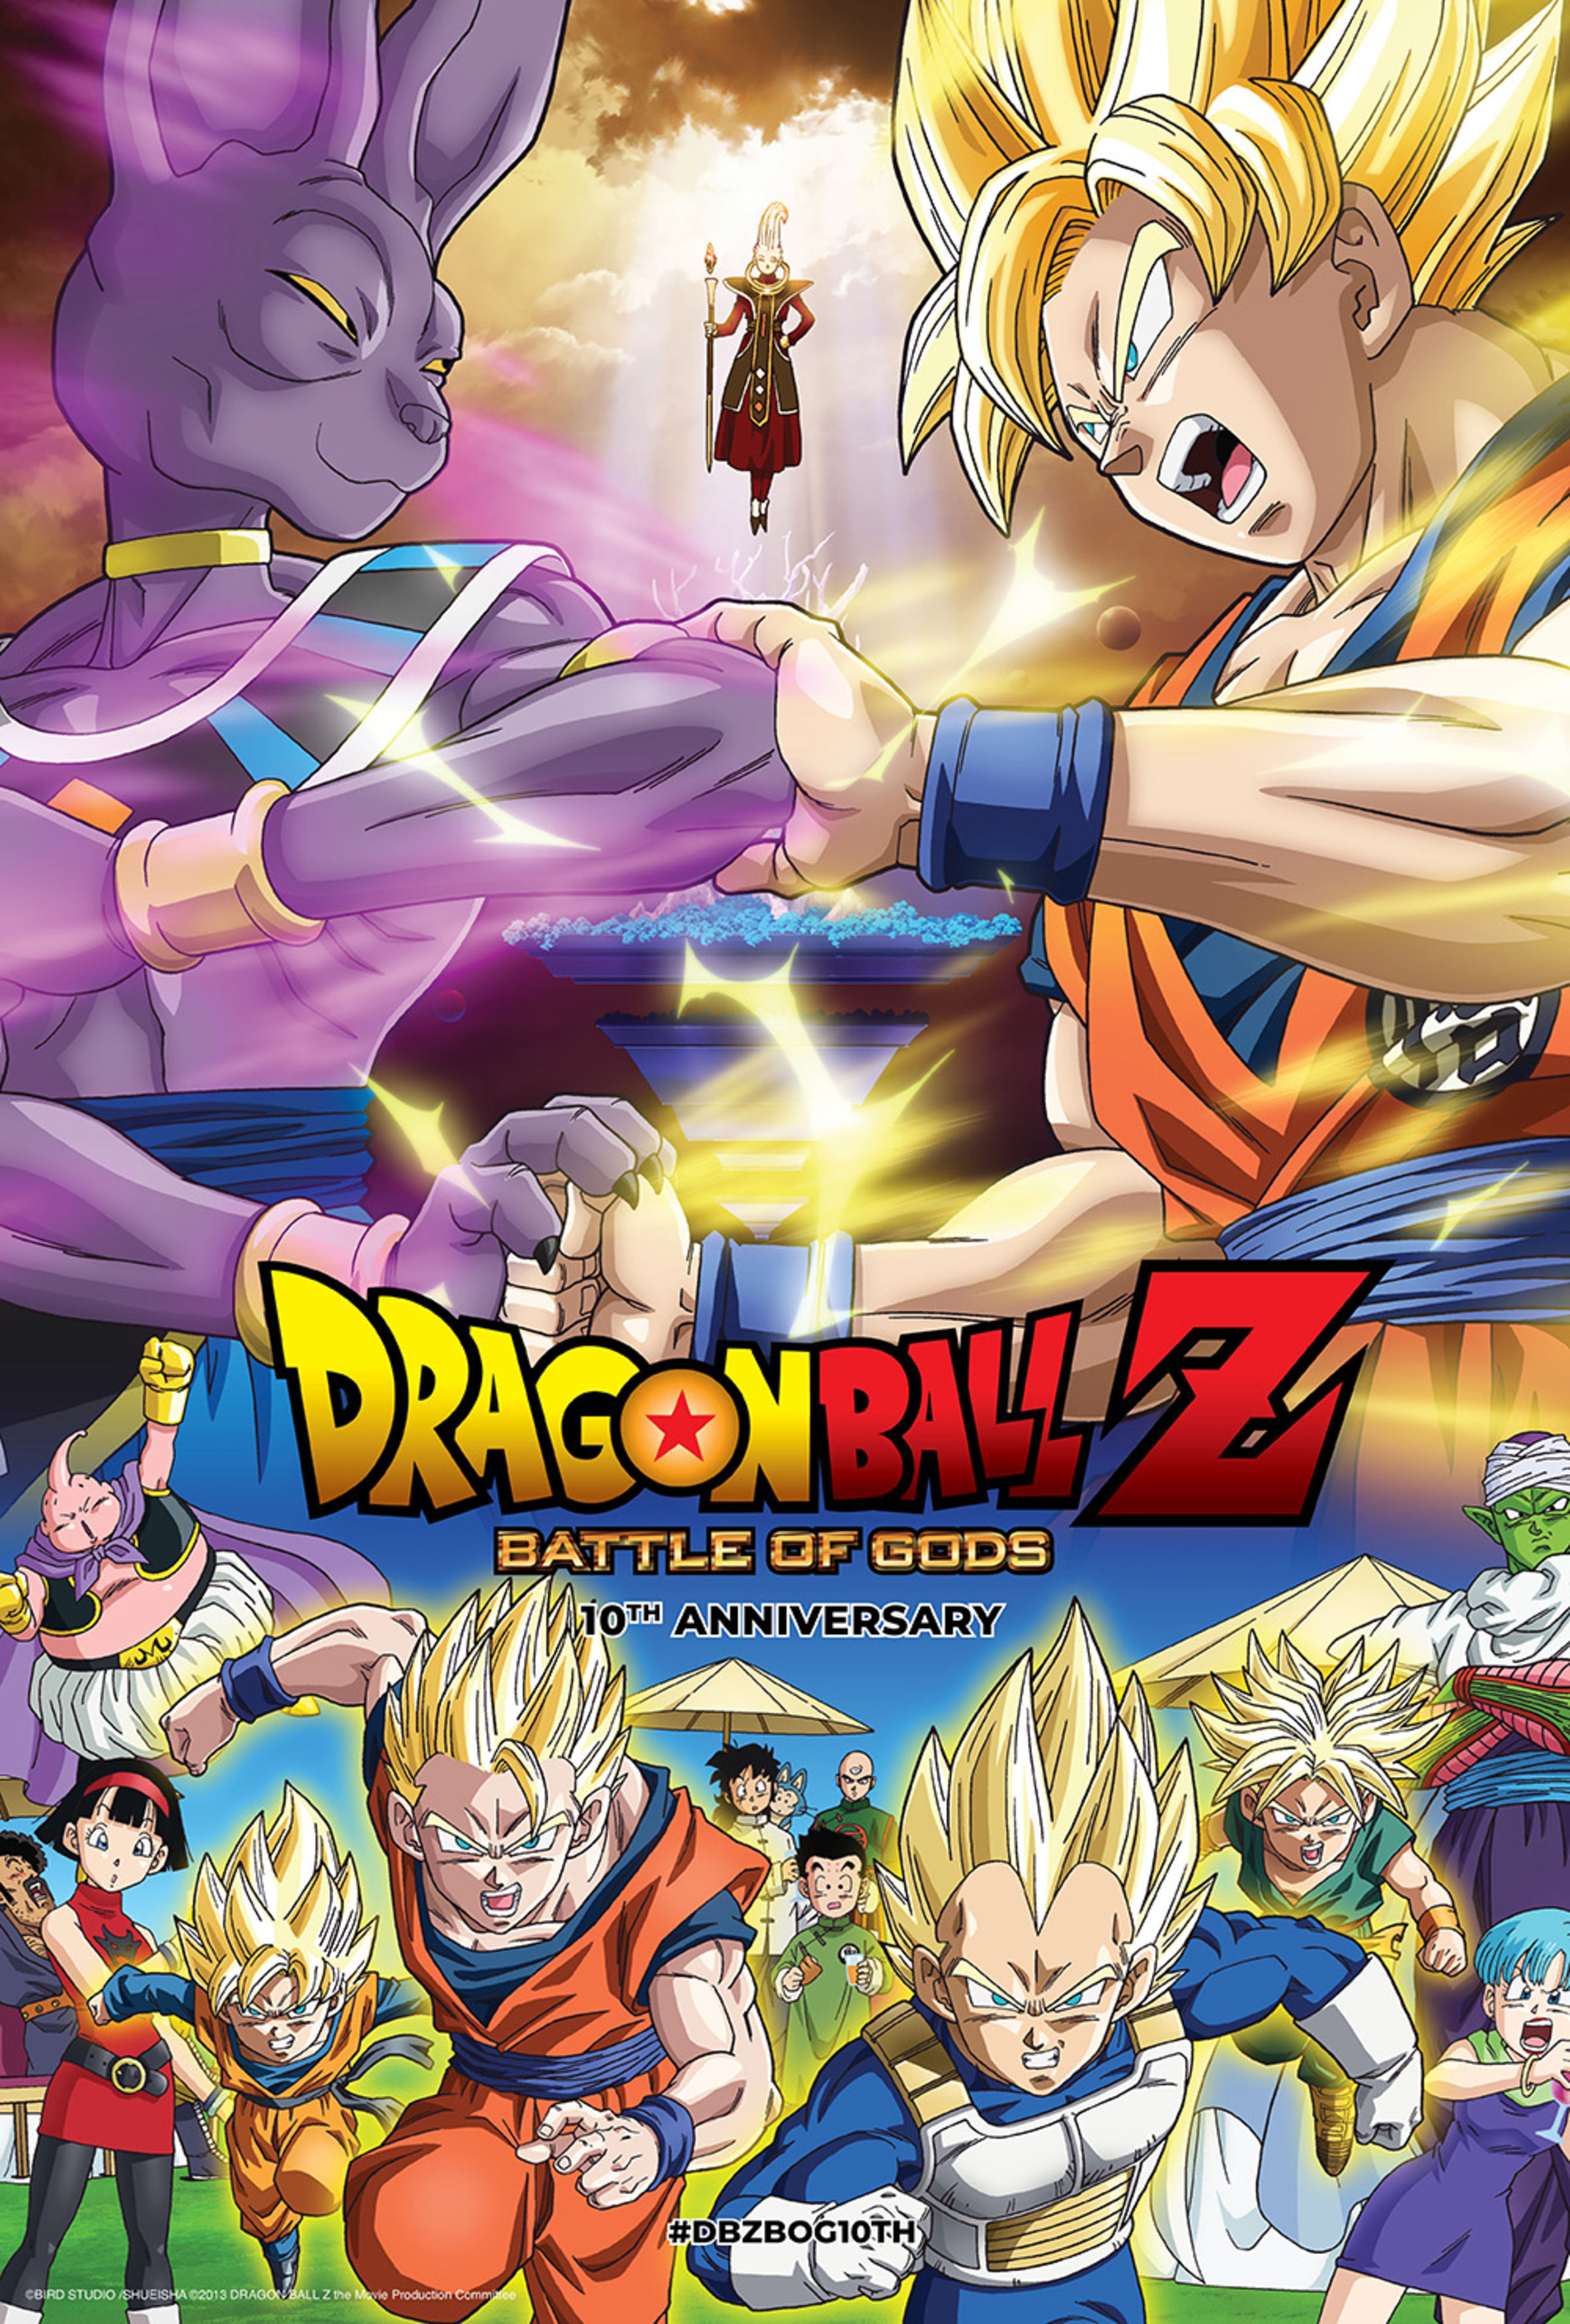 craig macneil recommends Dragon Ball Z Full Movies Online